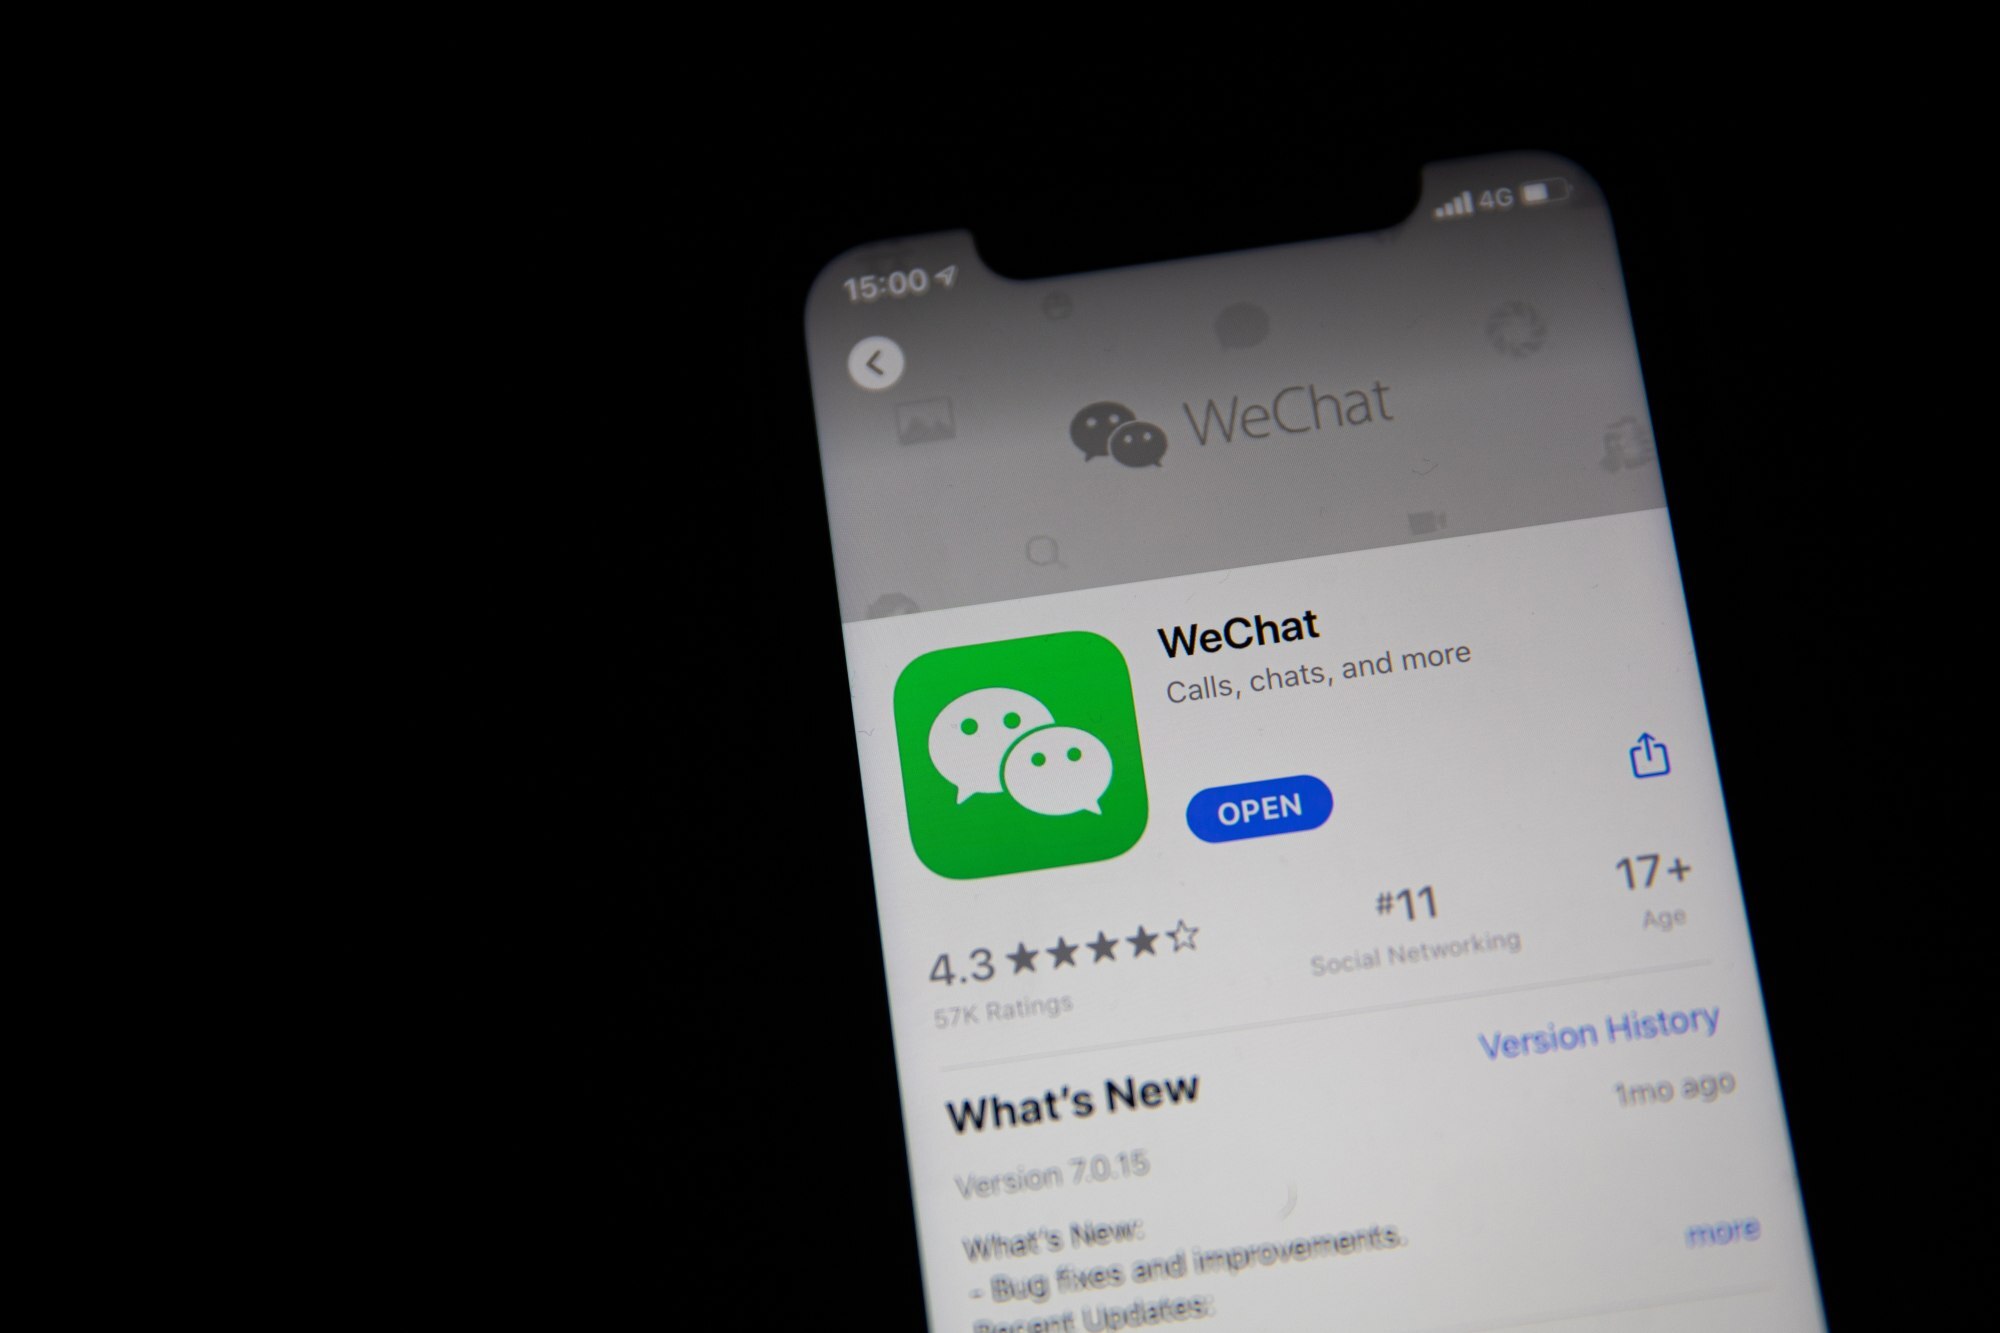 Tencent Holdings super app WeChat, along with mainland Chinese version Weixin, had a total of 1.2 billion monthly active users as of December 31, 2020. Photo: EPA-EFE